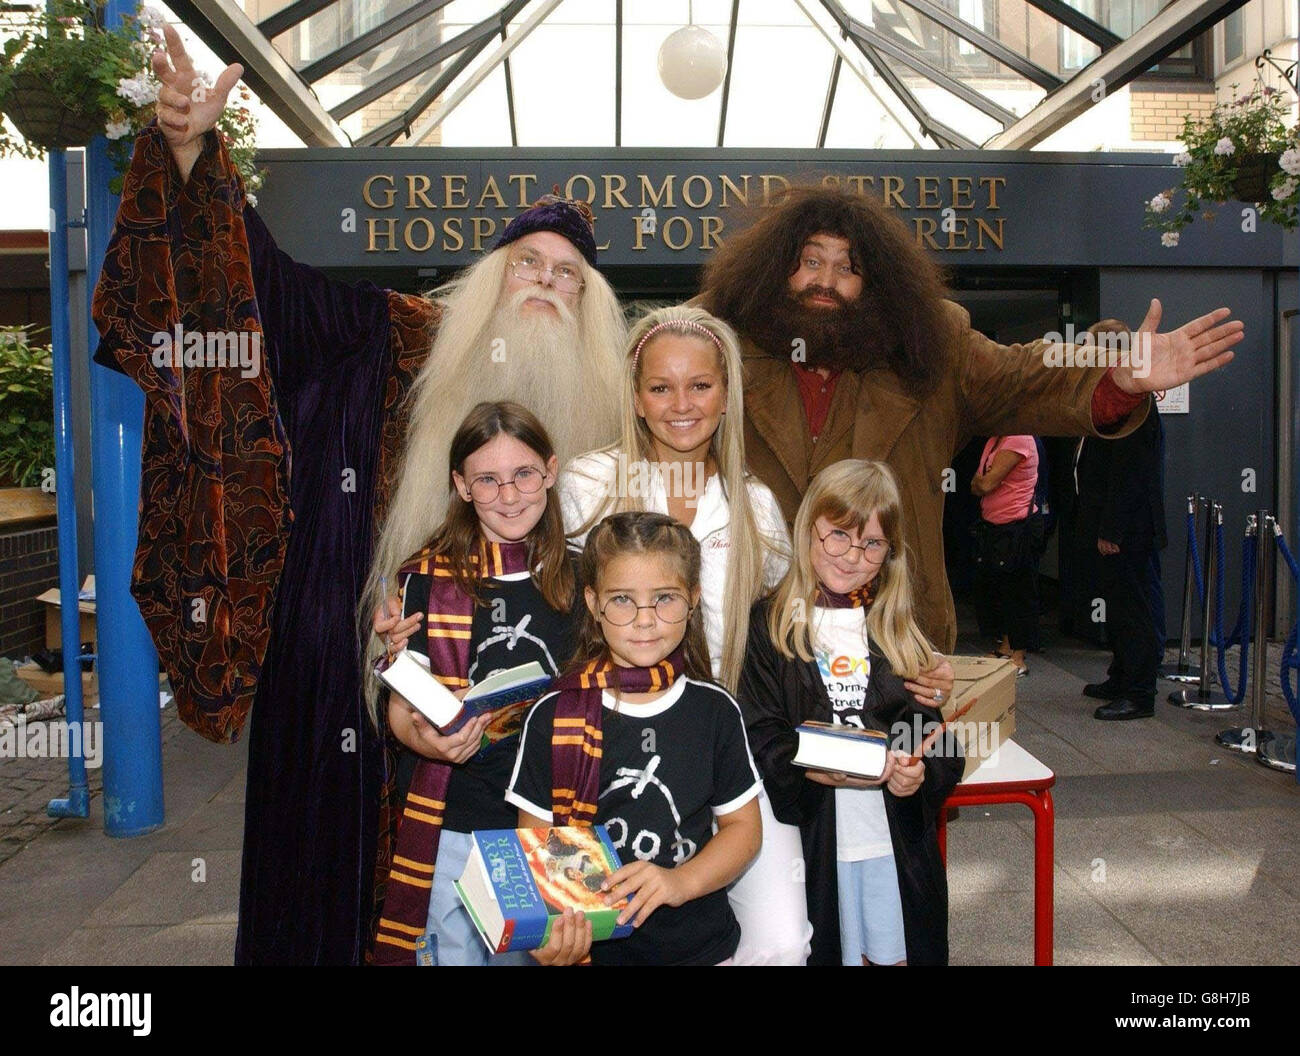 Jennifer Ellison, Hagrid and Professor Dumbledore with children (from left to right) Charlotte Horn, aged 11 rfom Luton, Bethany Evans, aged 6 from Swansea, and Bethany Horn, aged 8 from Luton during a visit to hand out copies of the new Harry Potter book, which was released at midnight. Stock Photo